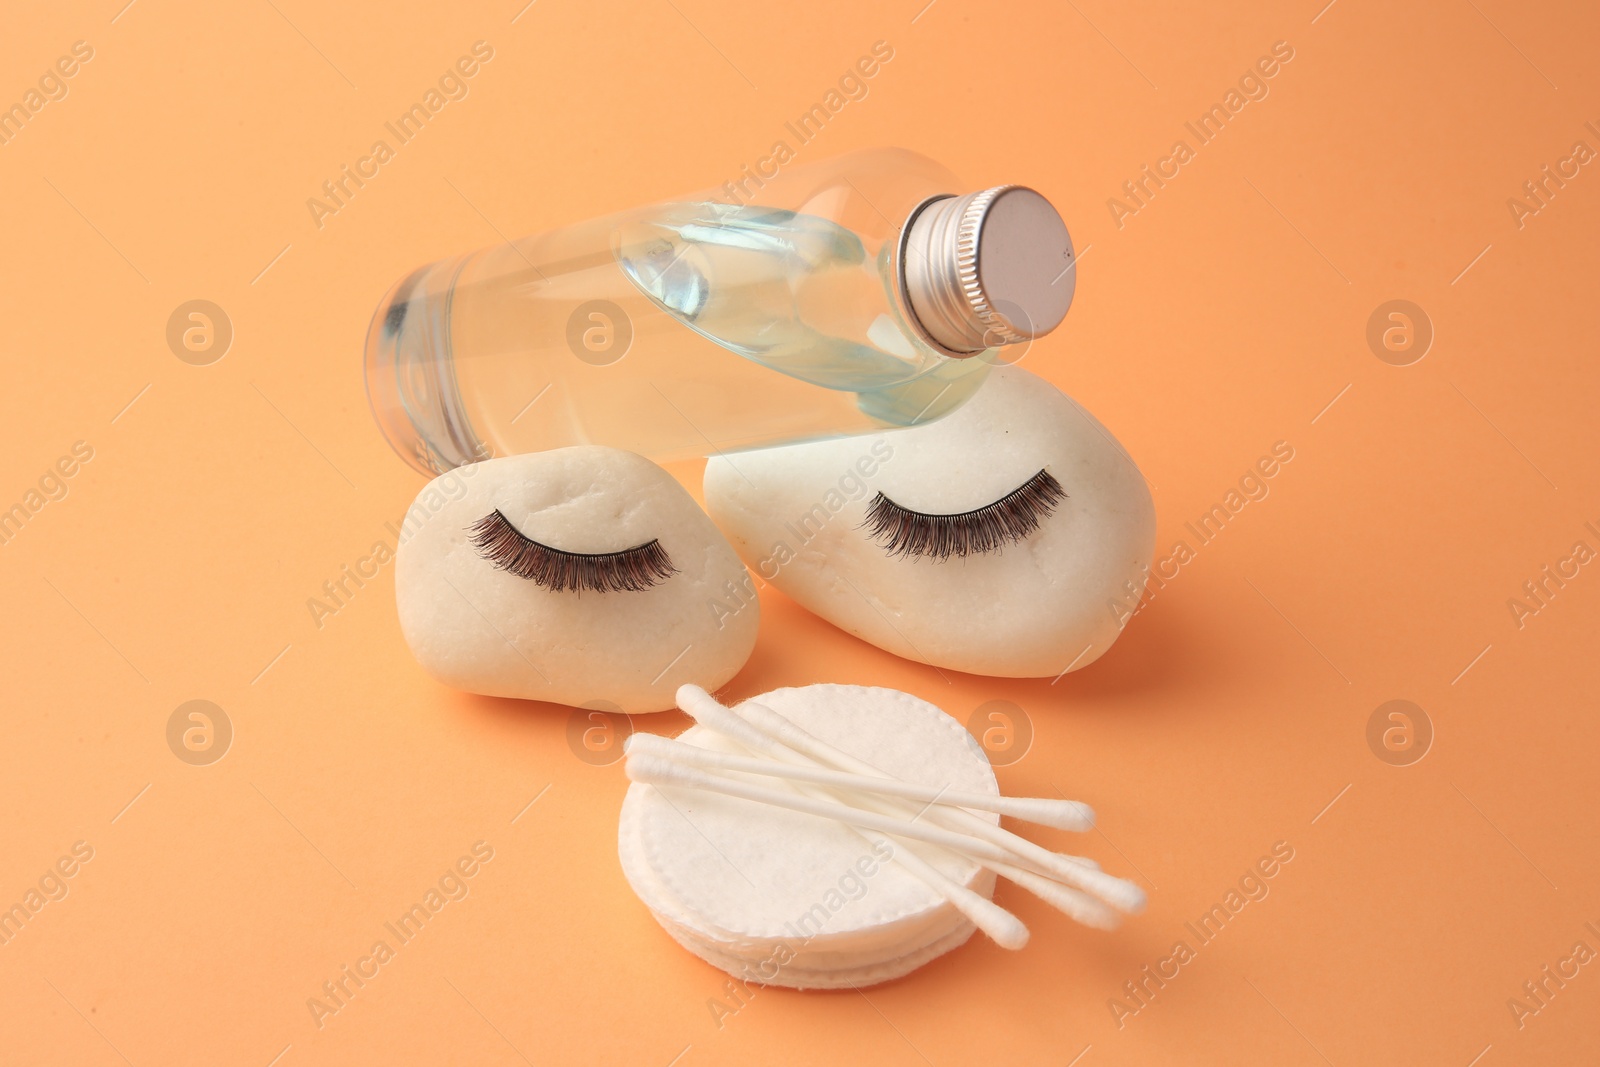 Photo of Composition with makeup remover and false eyelashes on pale orange background